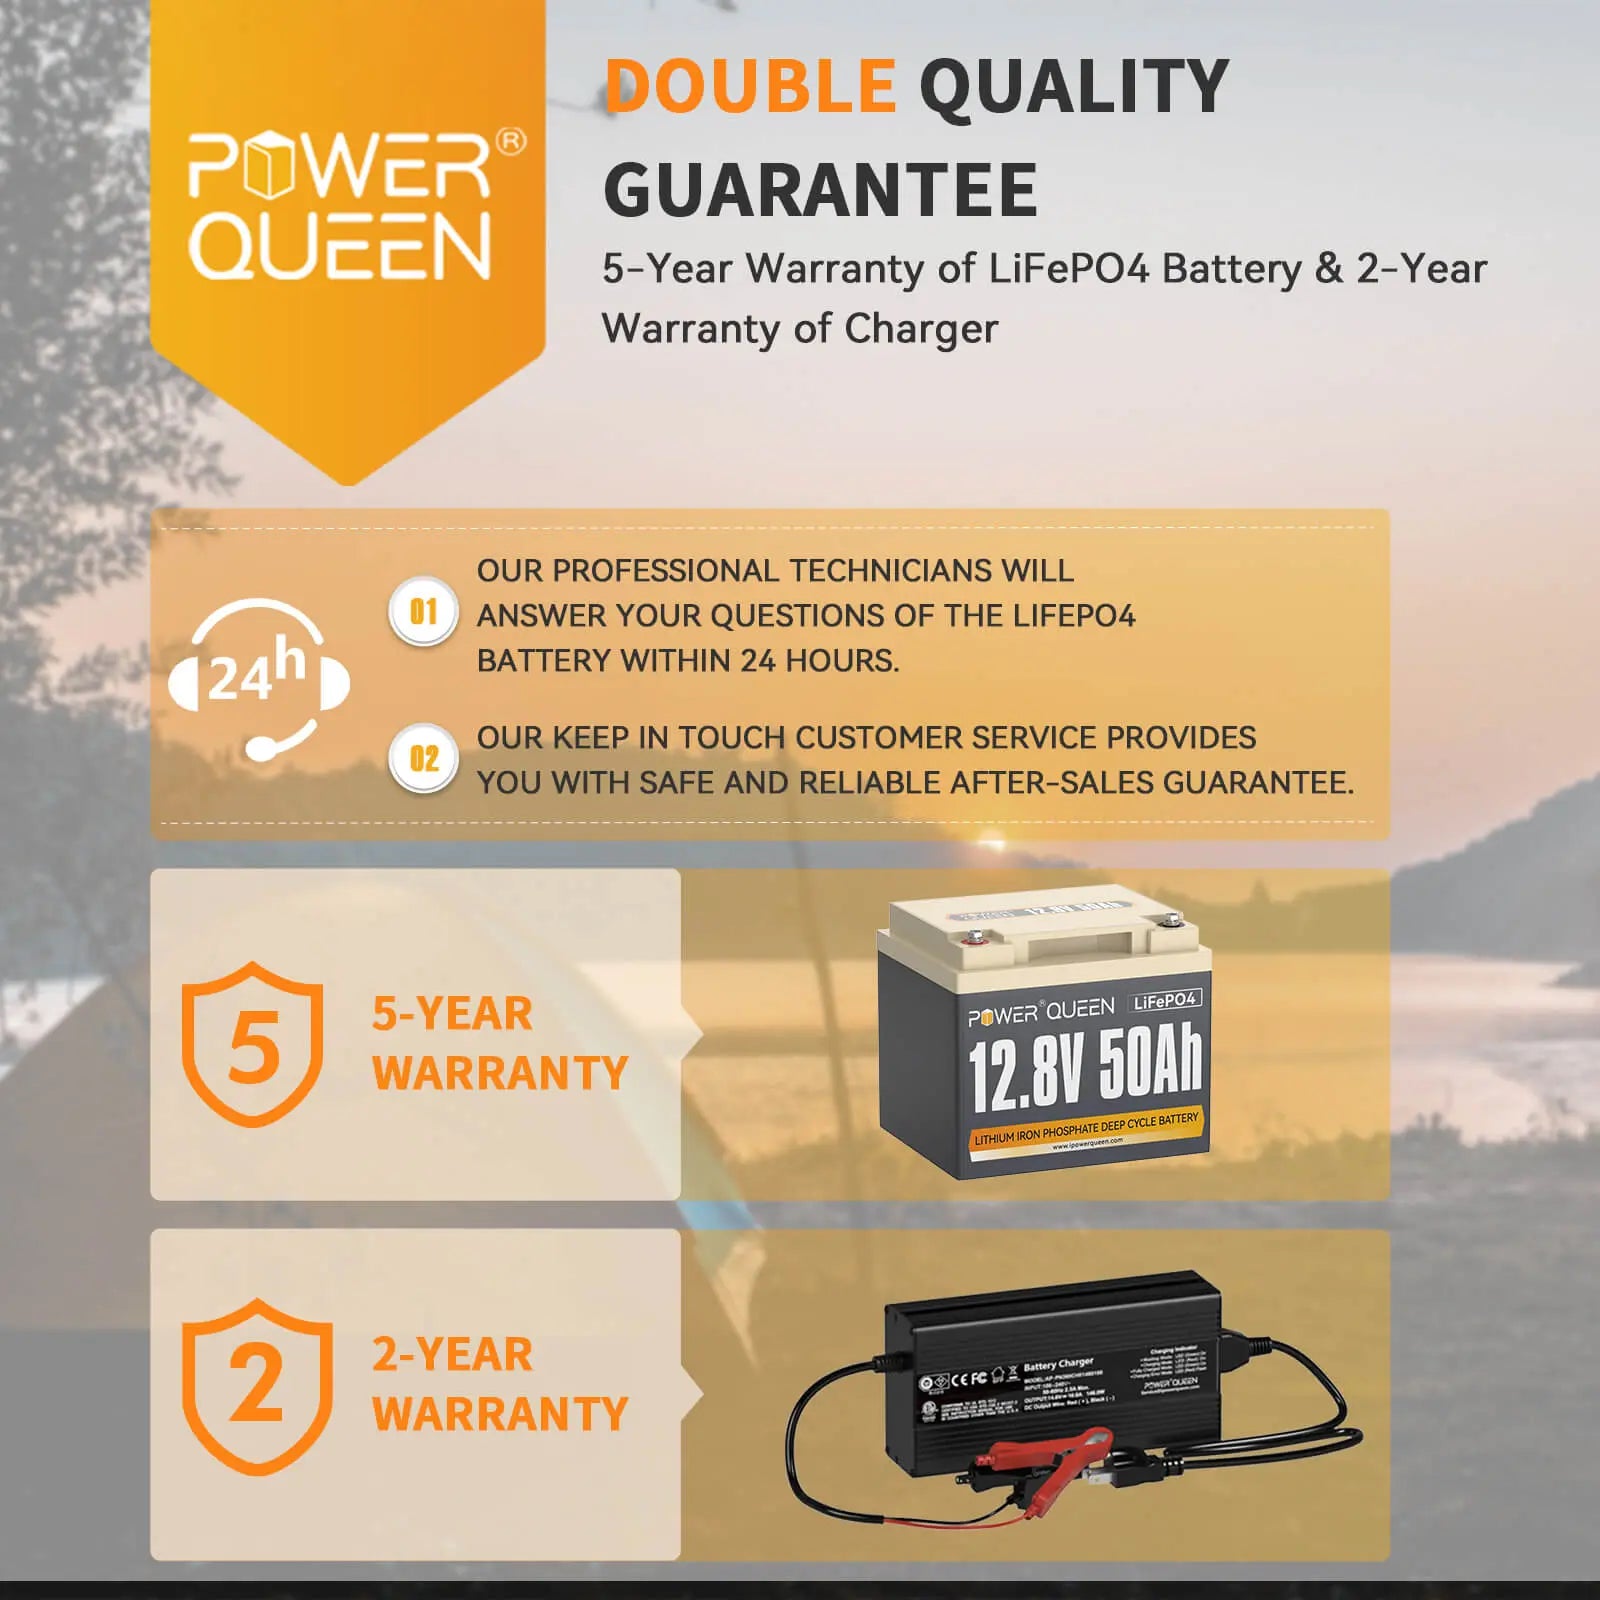 Power Queen 12.8V 50Ah LiFePO4 Battery with 14.6V 10A Automatic Smart LiFePO4 Battery Charger Power Queen